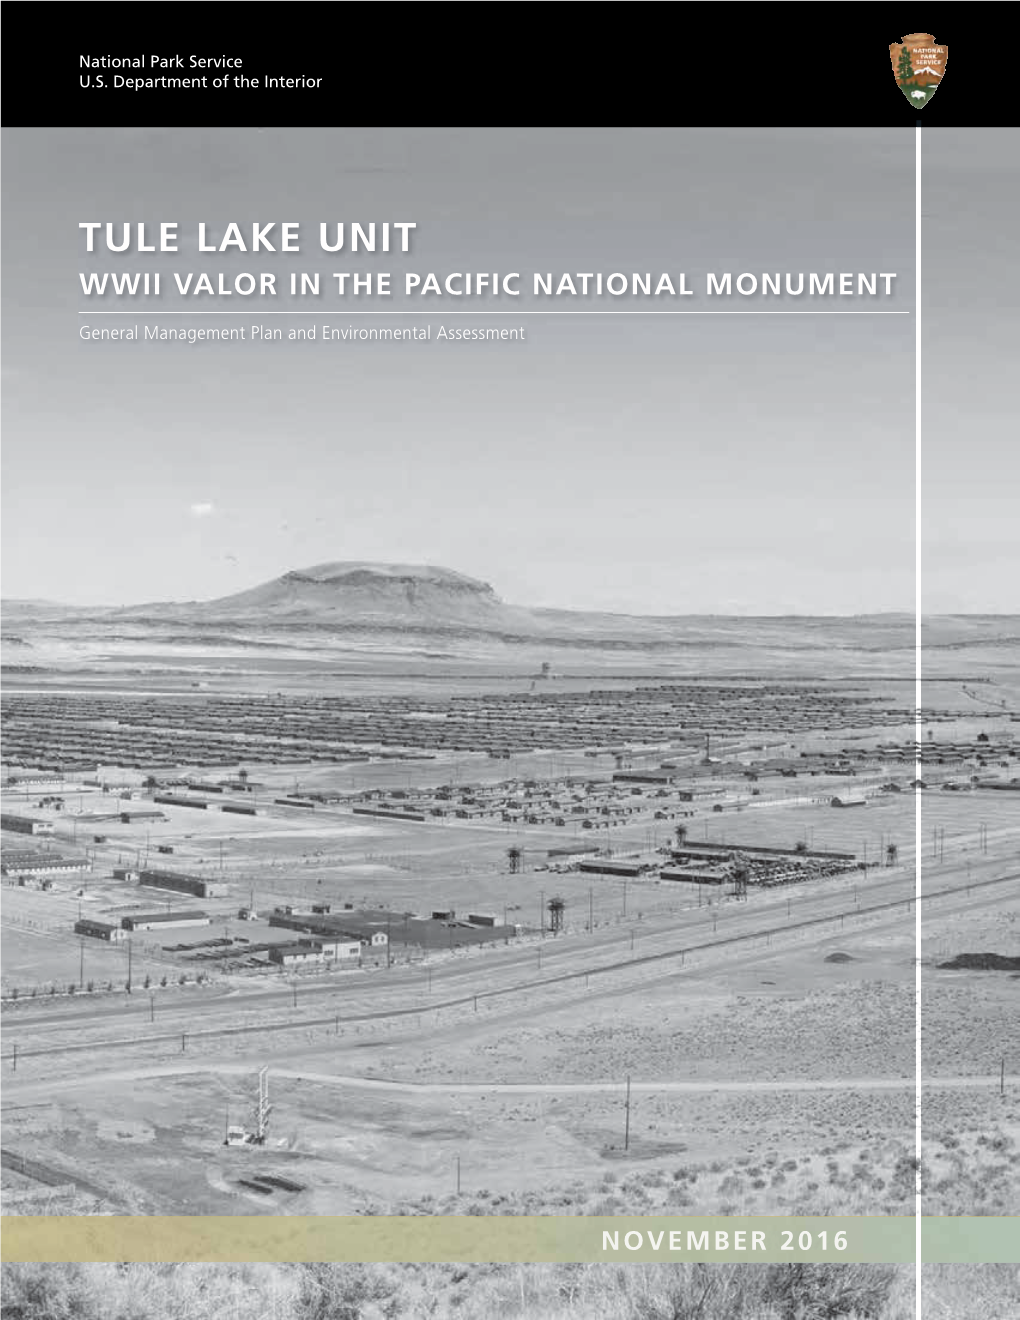 Tule Lake Unit Wwii Valor in the Pacific National Monument